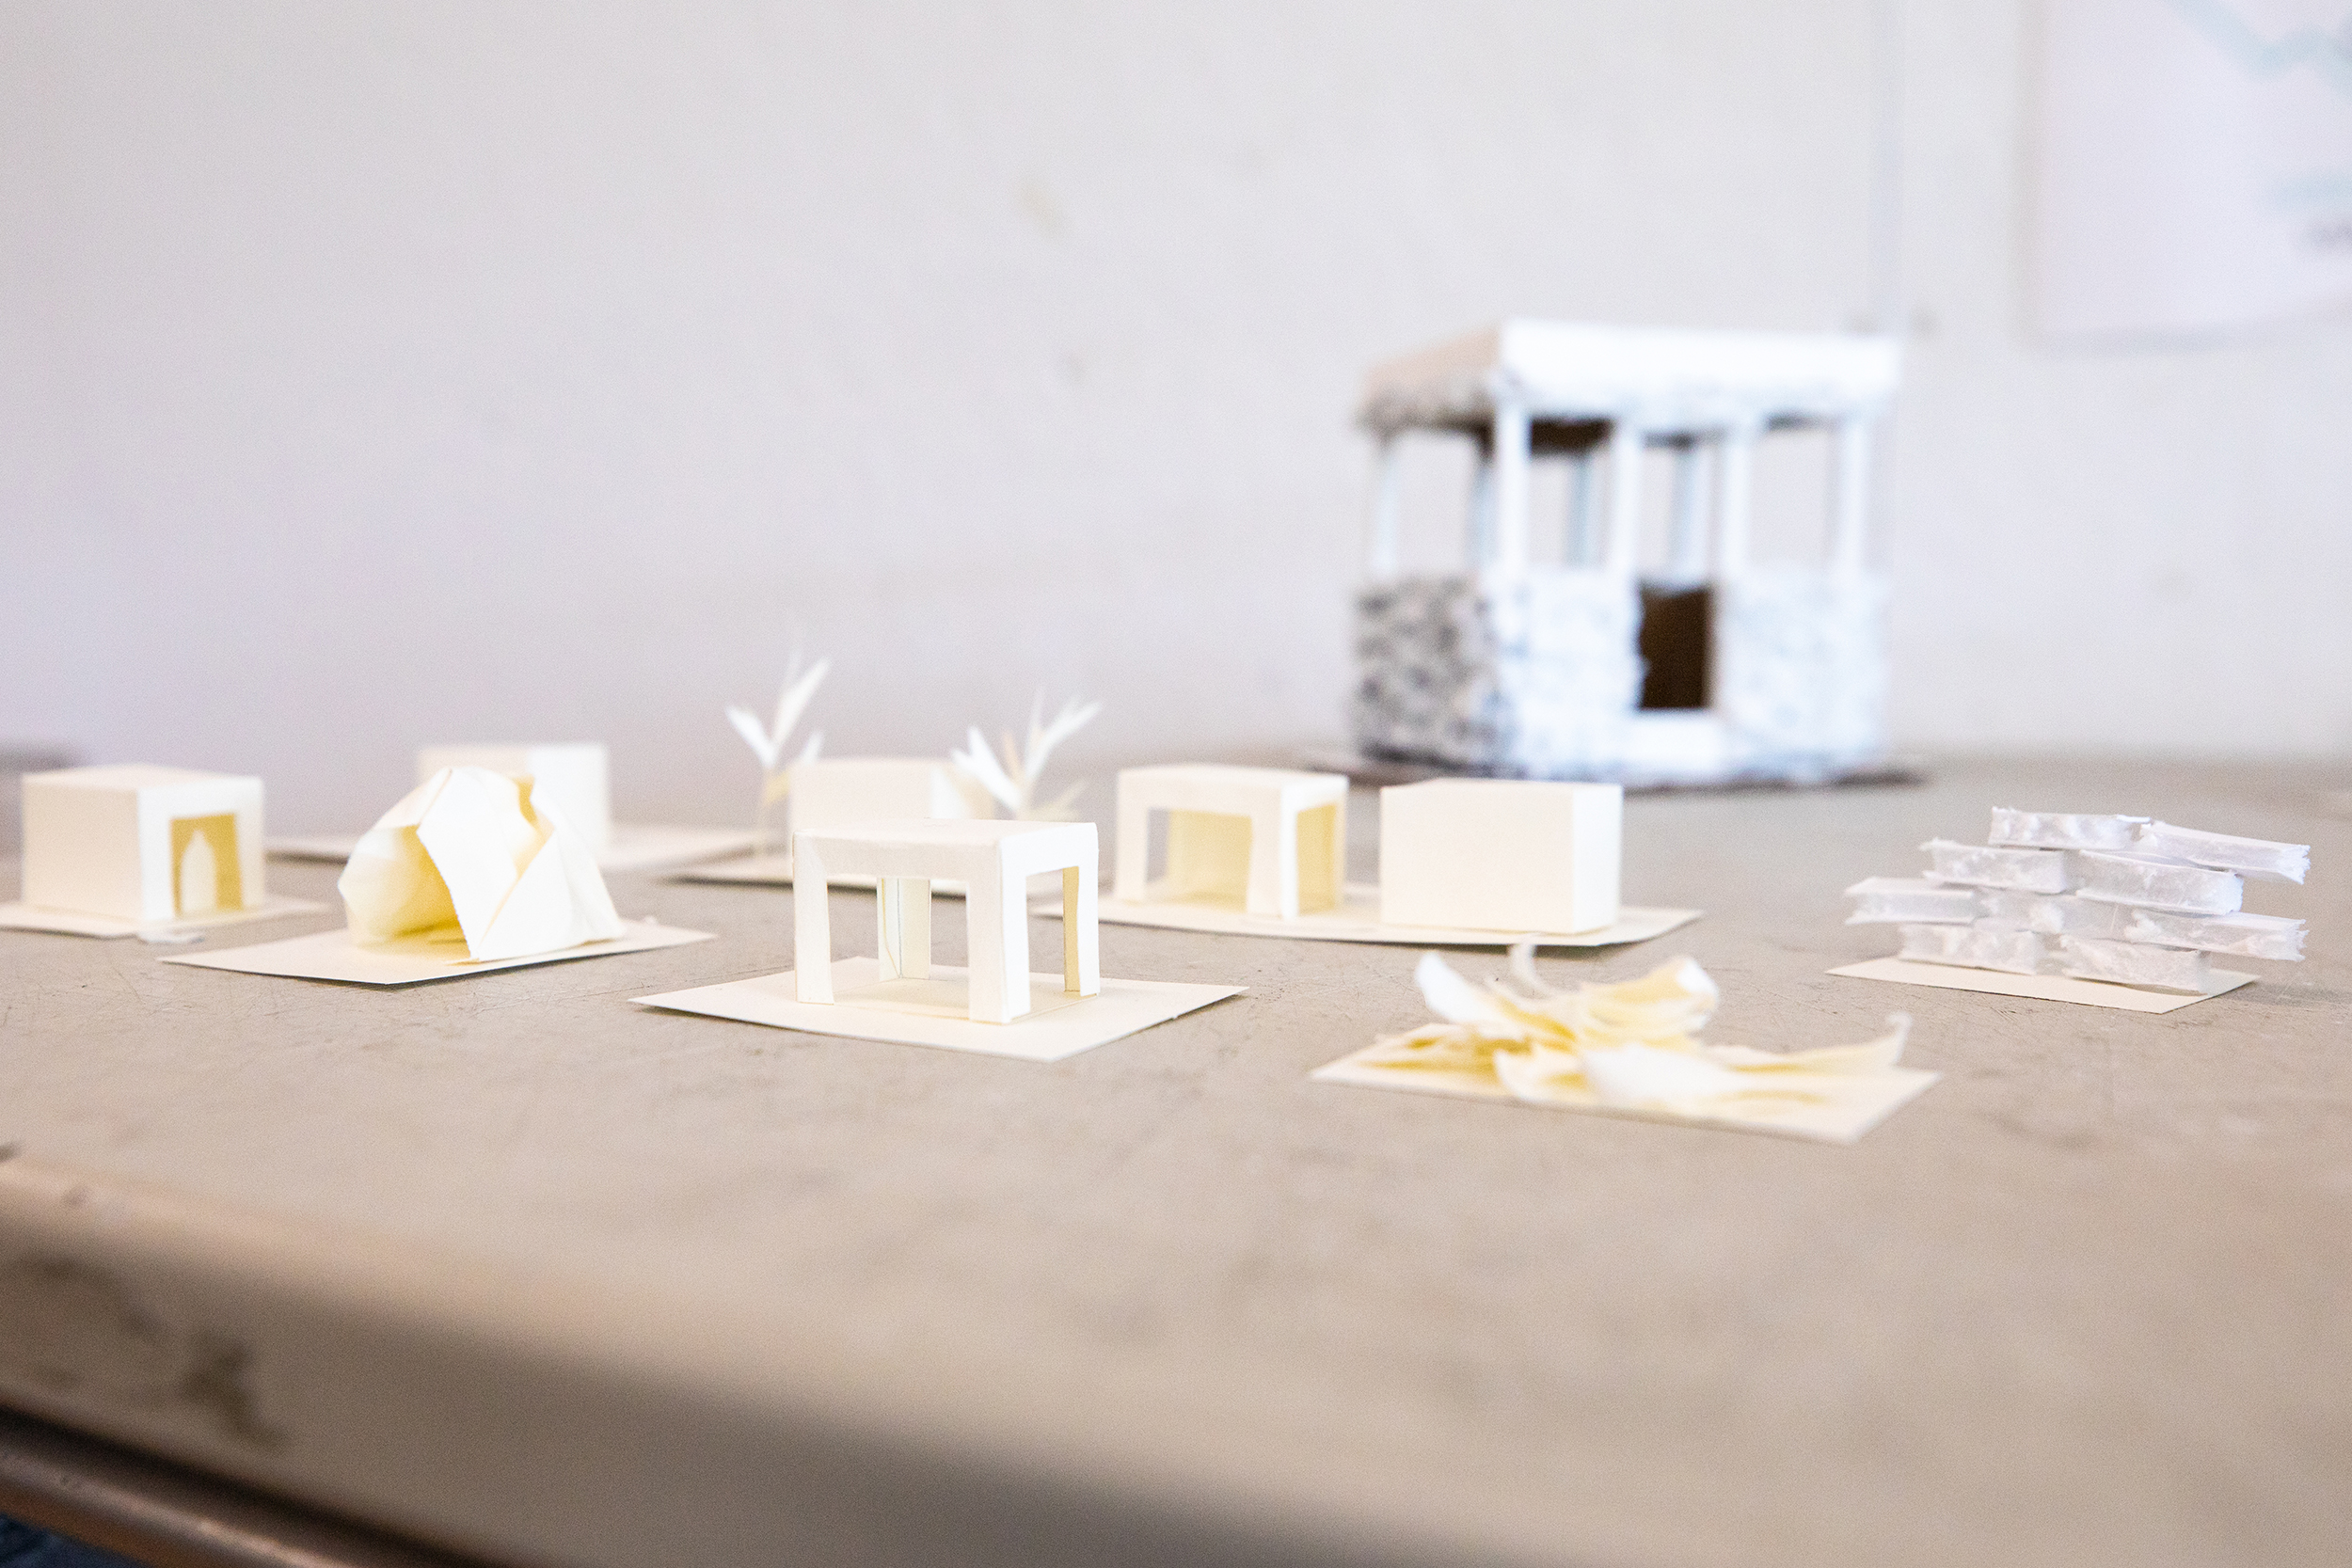 buildings modeled in white paper